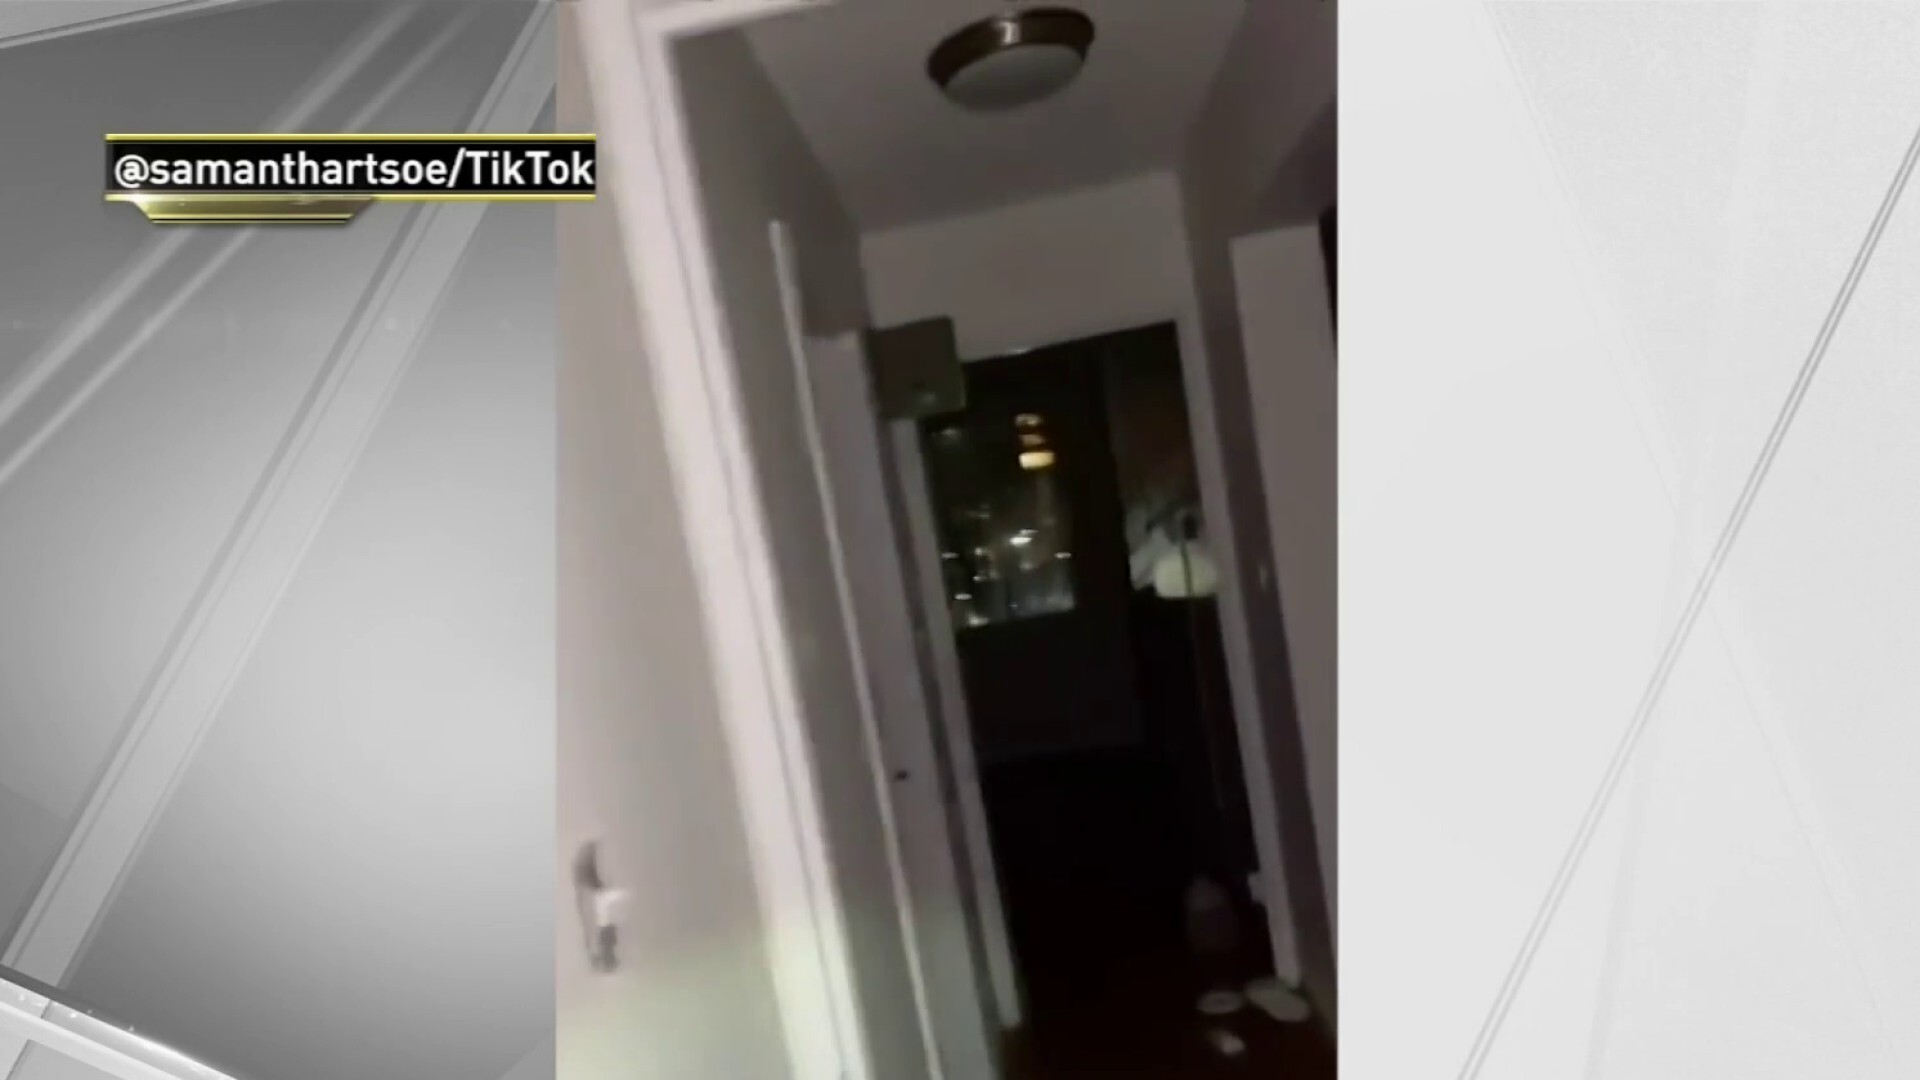 https://media.nbcnewyork.com/2021/03/NYC-Renter-Finds-Mysterious-Room-Behind-Bathroom-Mirror.jpg?quality=85&strip=all&fit=1920%2C1080